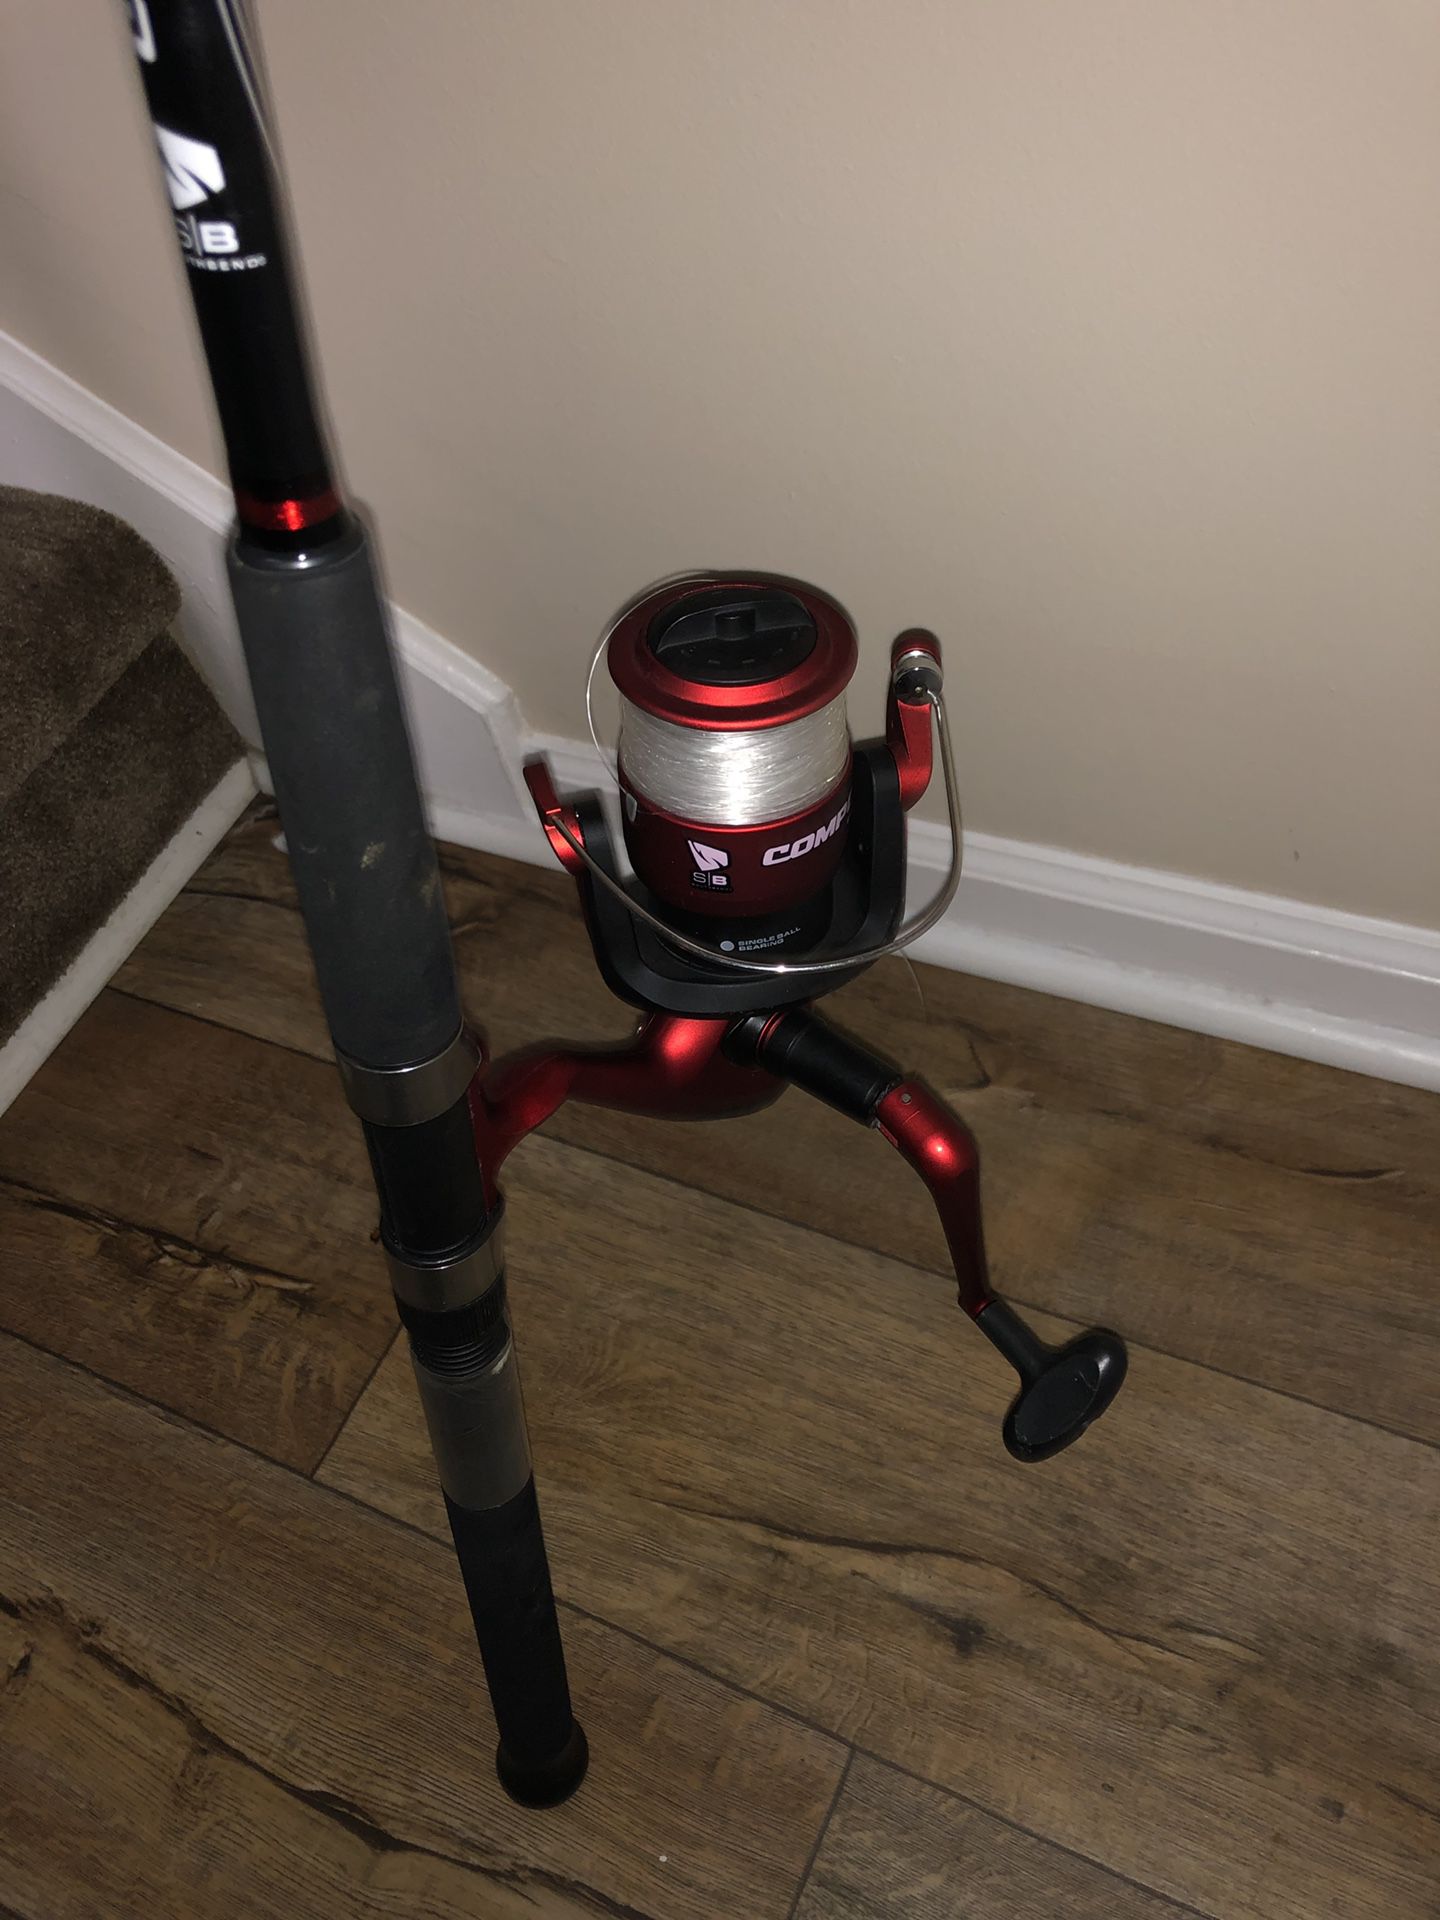 Competitors fishing rod and reel